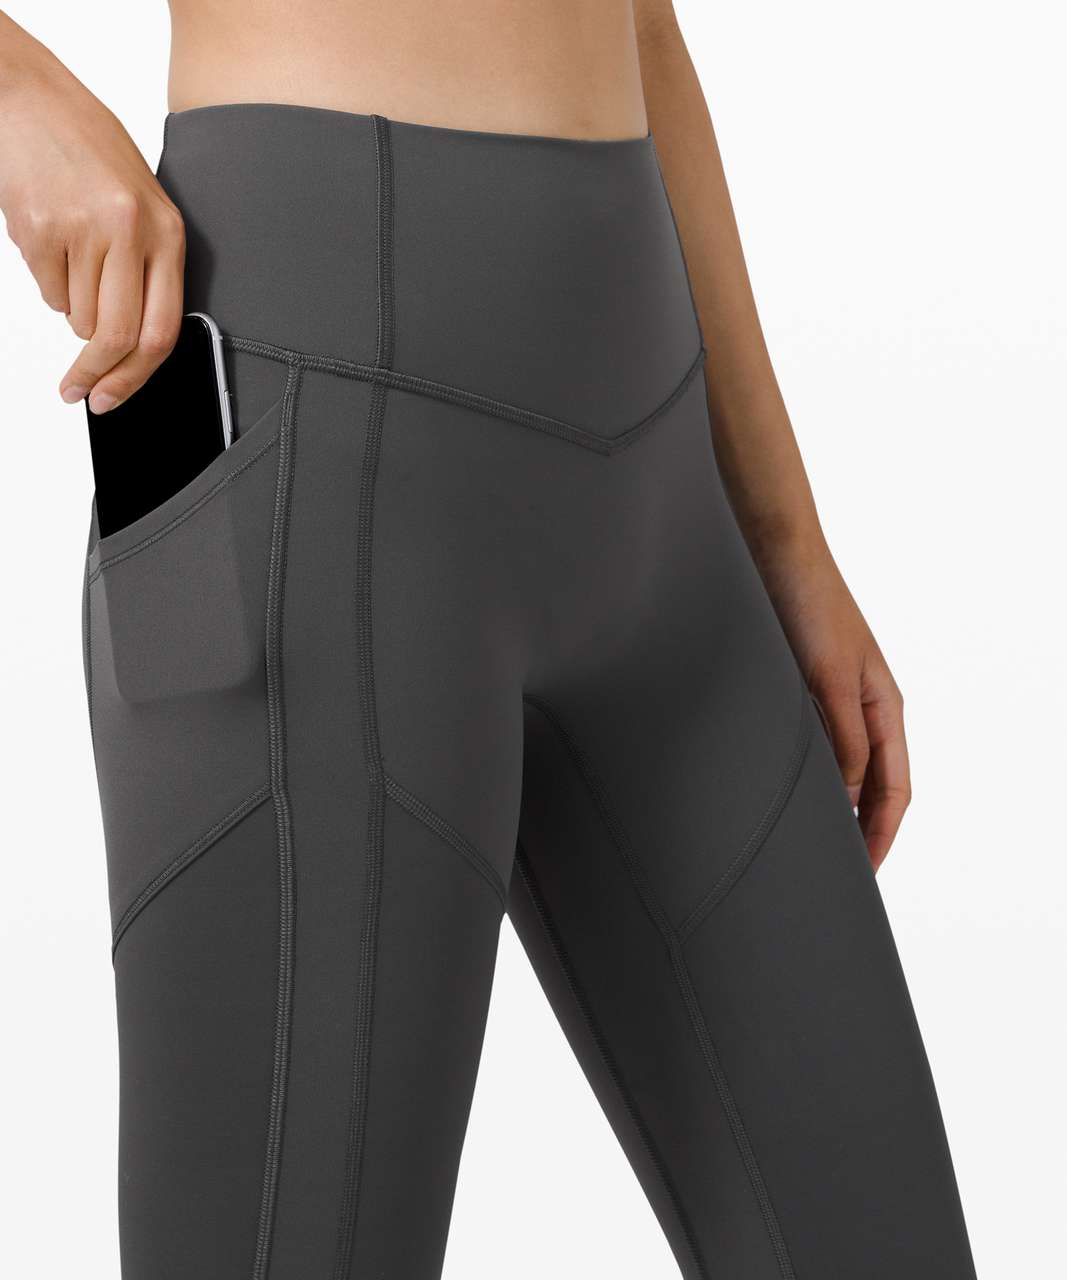 Lululemon All The Right Places Pant II 28" - Graphite Grey